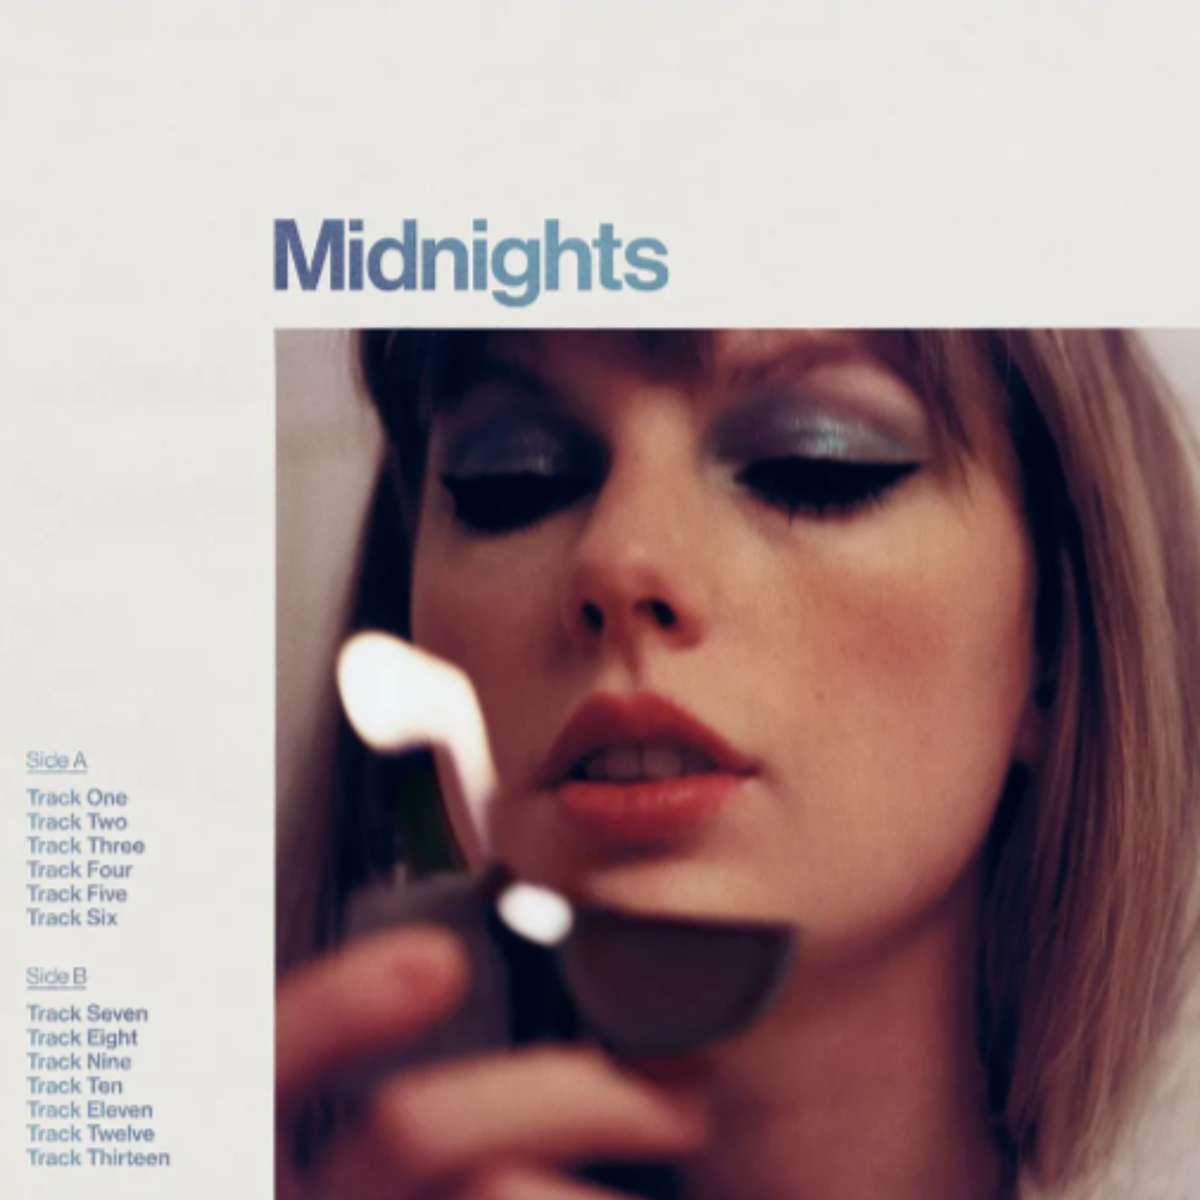 Midnights - Taylor Swift album cover puzzle online from photo